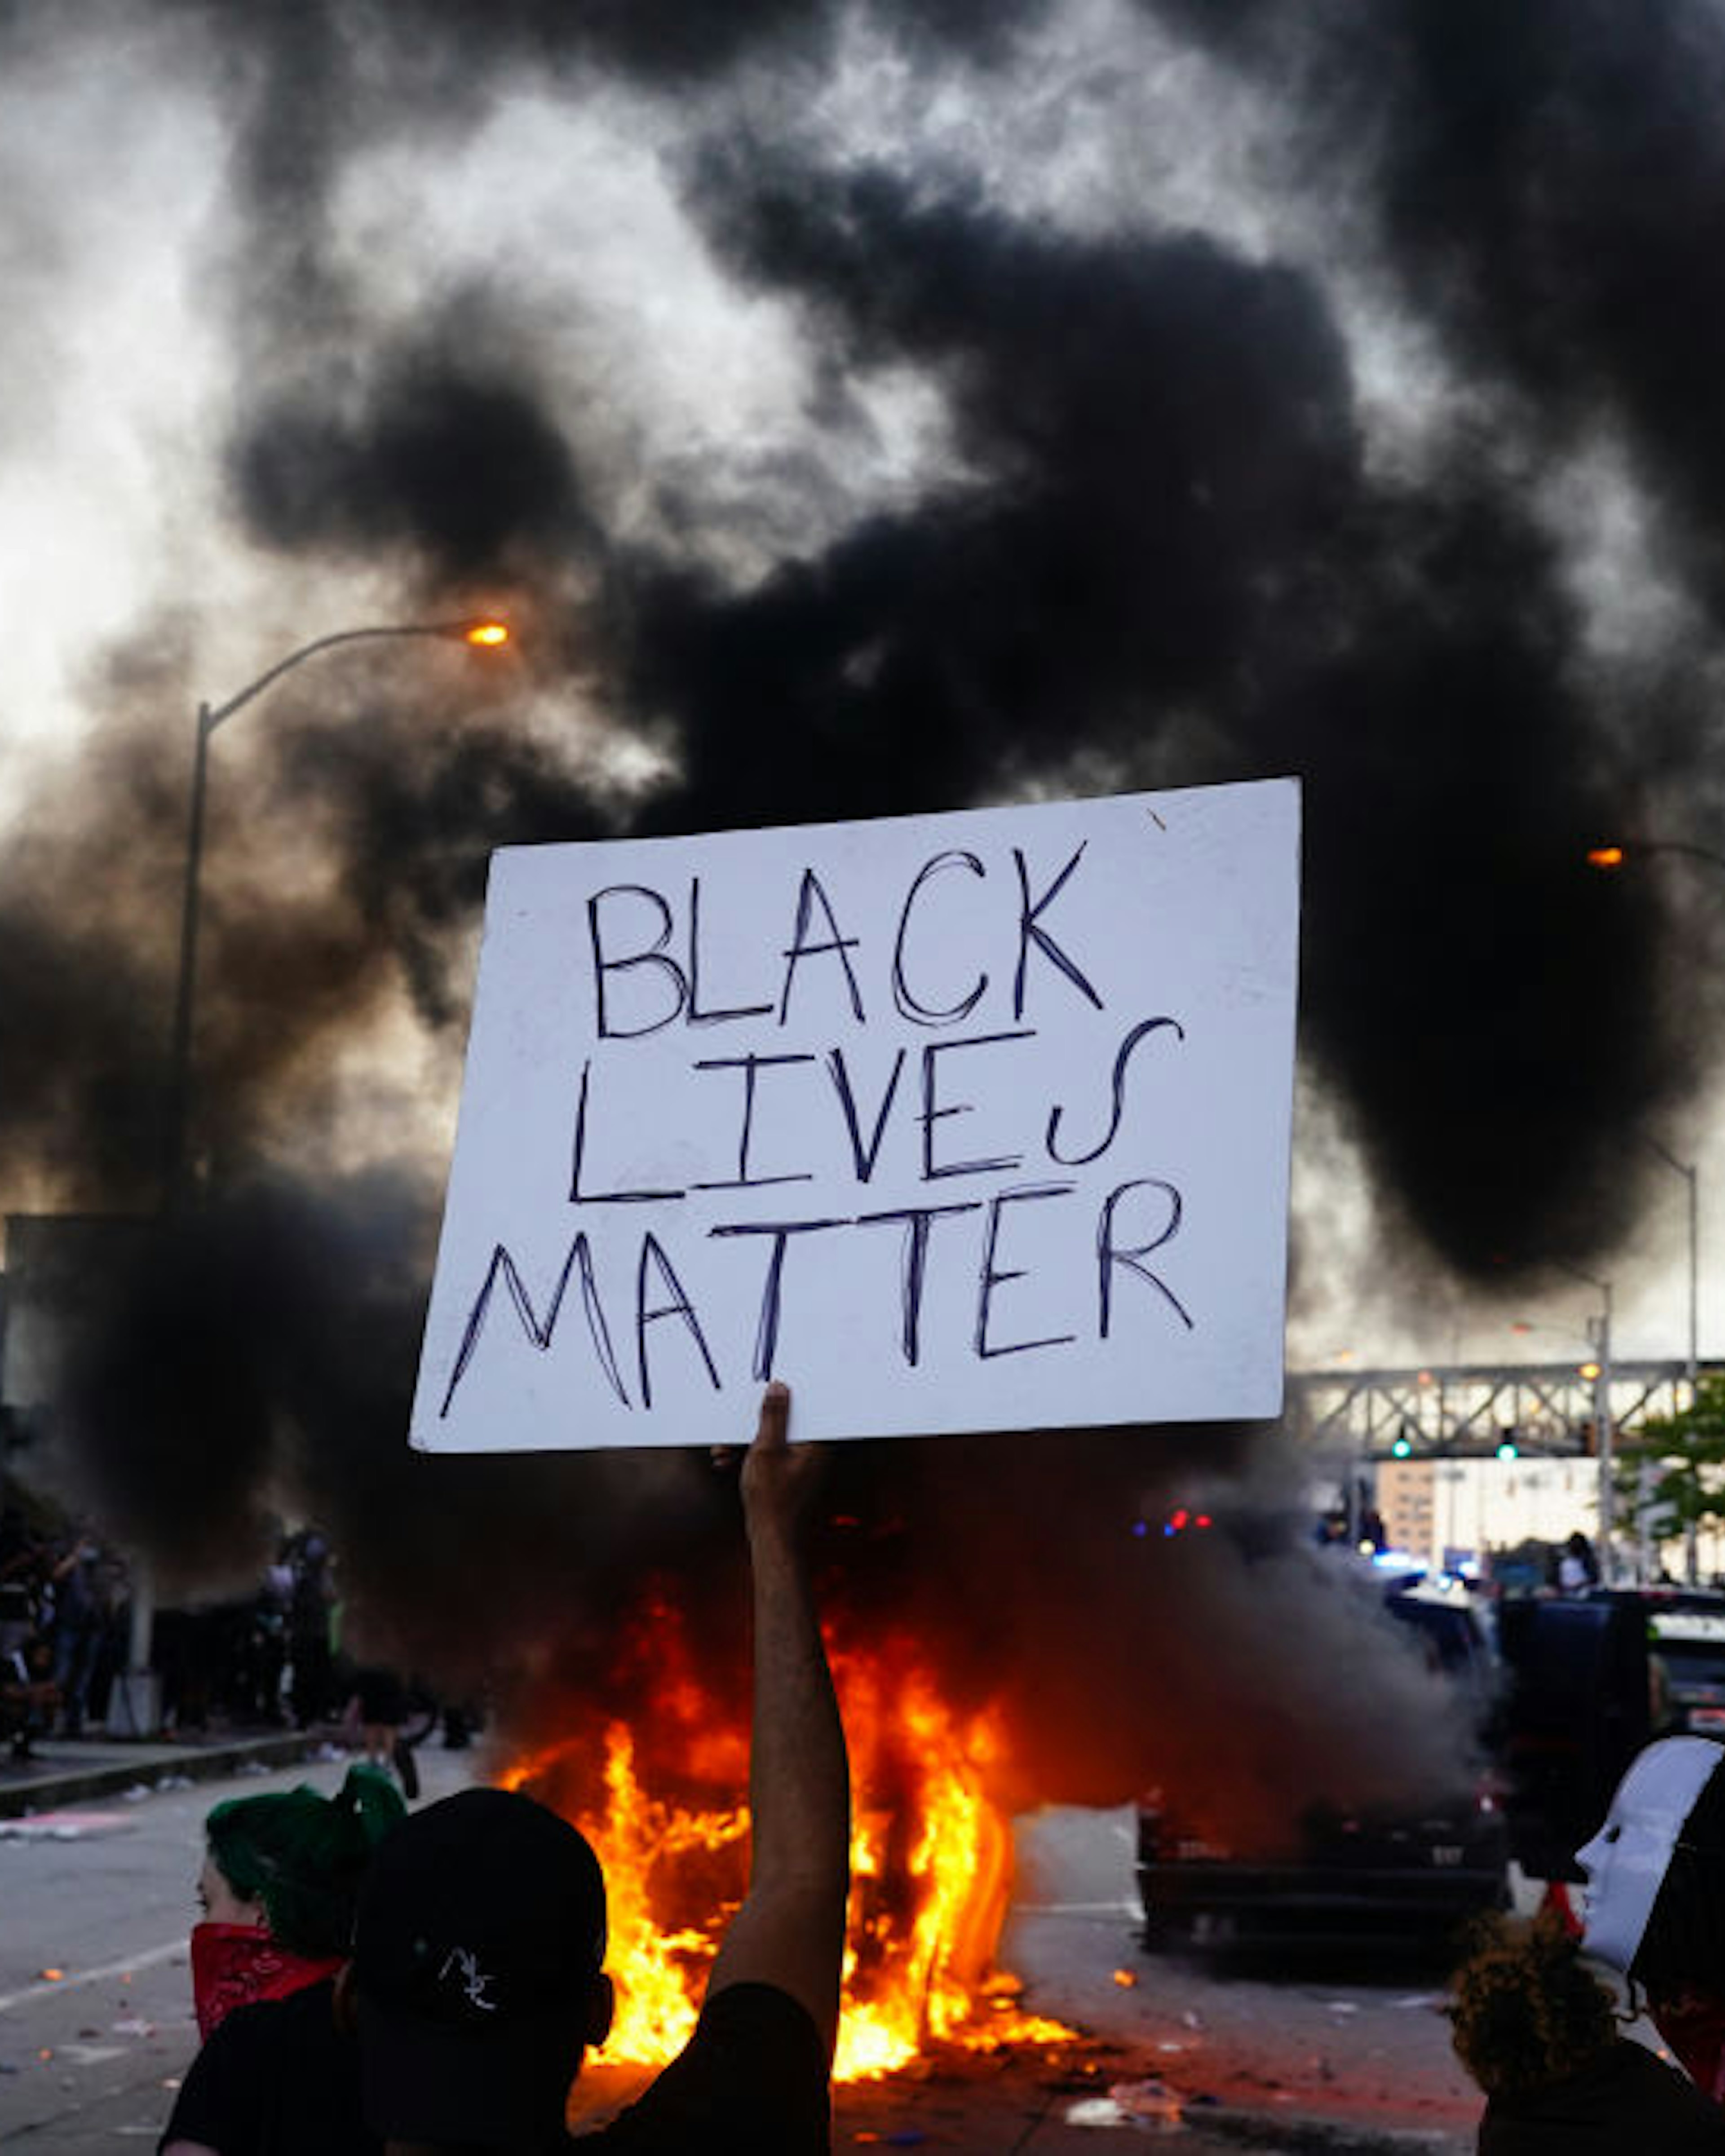 ATLANTA, GA - MAY 29: A man holds a Black Lives Matter sign as a police car burns during a protest on May 29, 2020 in Atlanta, Georgia. Demonstrations are being held across the US after George Floyd died in police custody on May 25th in Minneapolis, Minnesota. (Photo by Elijah Nouvelage/Getty Images)